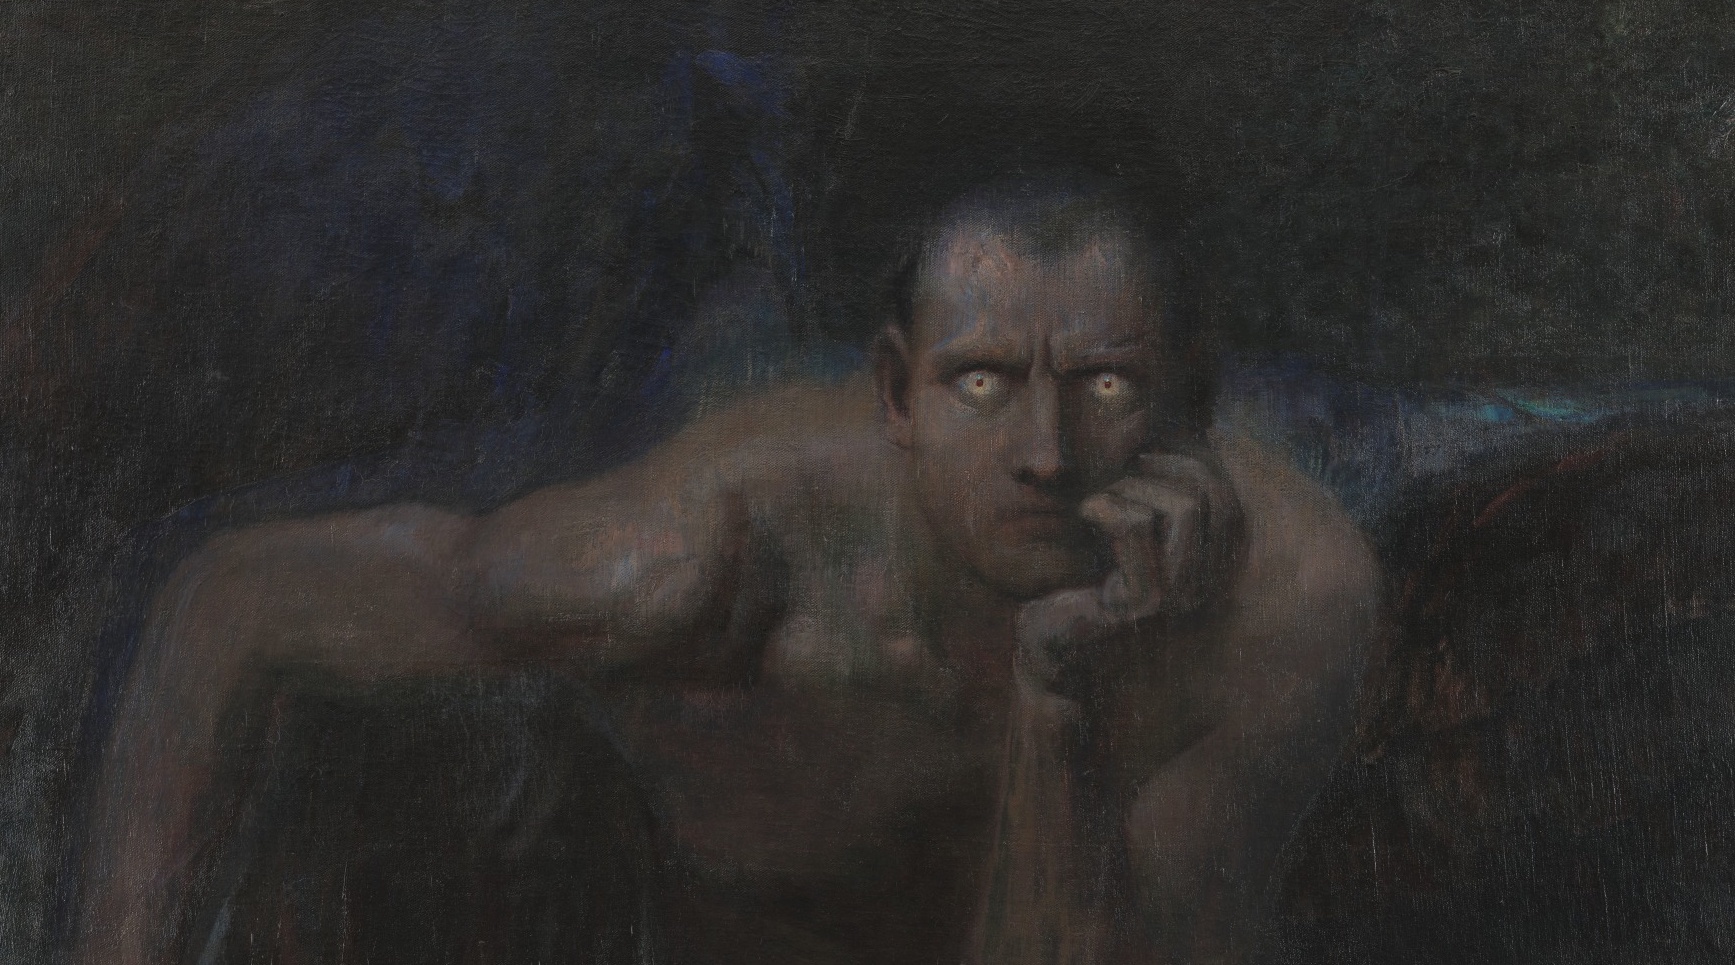 Satan from the epic poem "Paradise Lost", sits in darkness looking directly at the viewer. Painting by Franz von Stuck, "Lucifer", 1890.